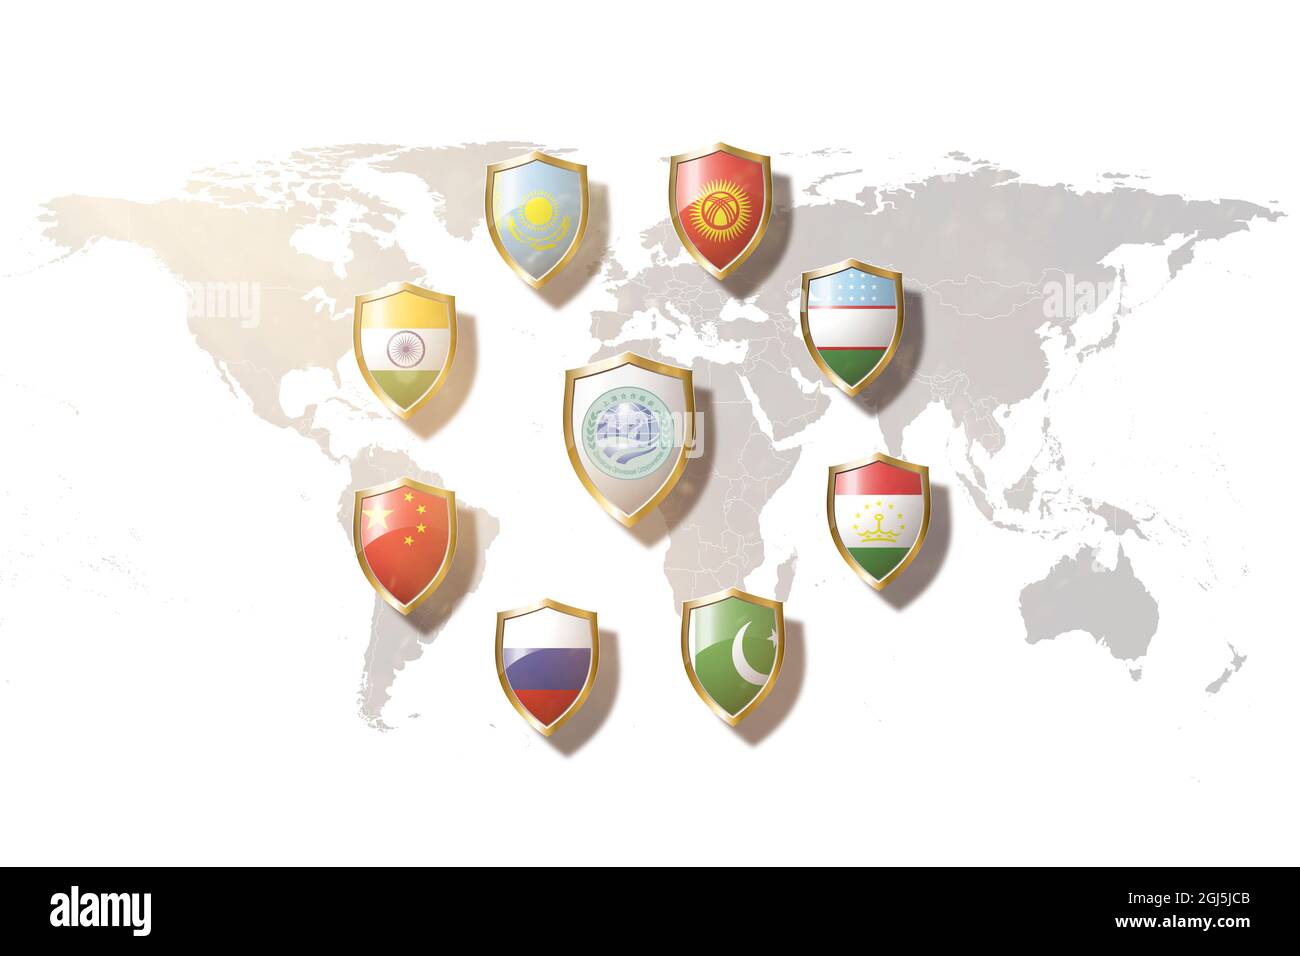 Shanghai Cooperation Organization (SCO) countries flags in golden shield on world map background. Stock Photo